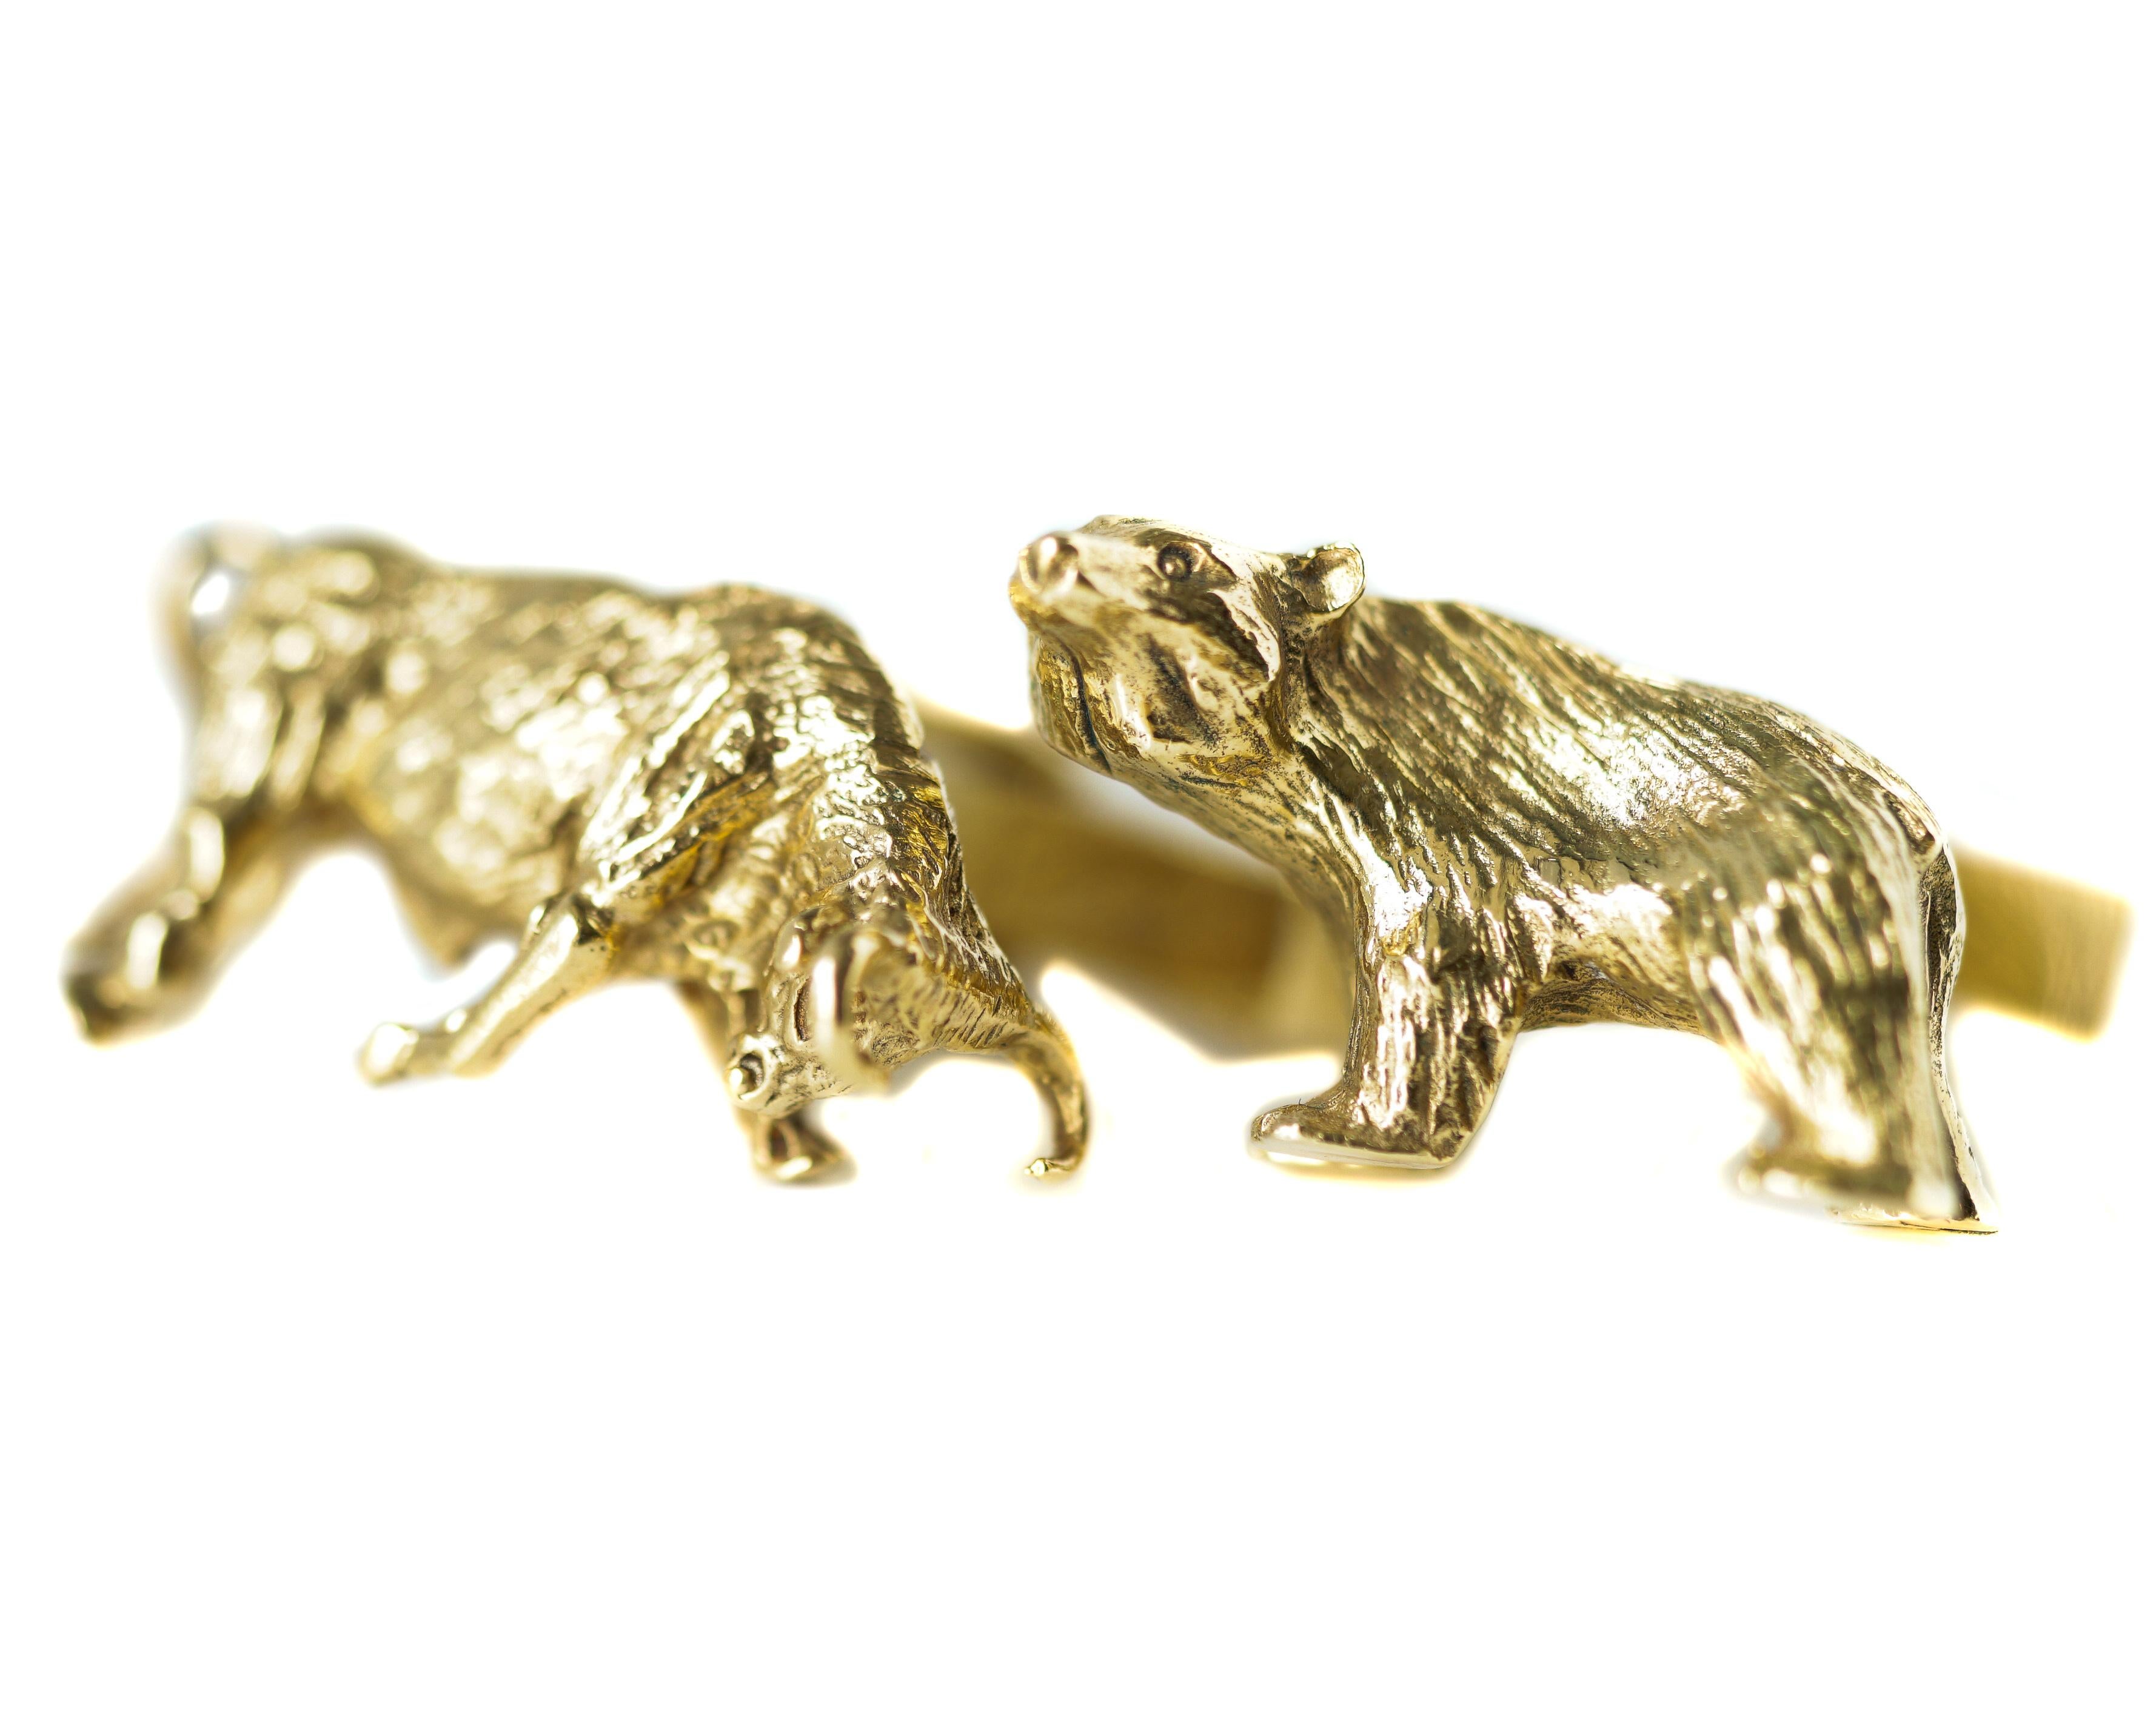 Tiffany and Co Wall Street motif Cufflinks - 14 karat Yellow Gold

Features:
1 Bull and 1 Bear cufflink with Toggle Backs
Crafted in 14 karat Yellow Gold, Richly Textured and Intricately Detailed
Cufflinks measure approximately 25 x 14